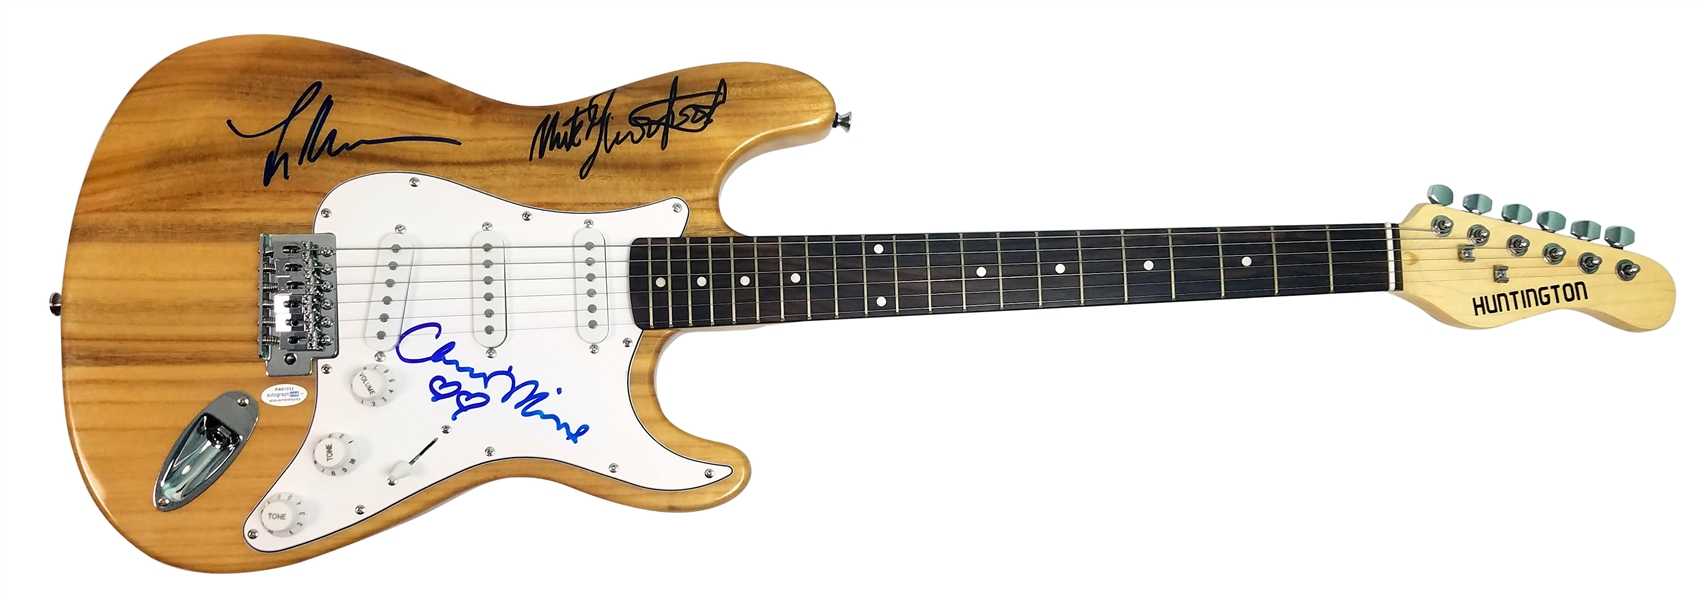 Fleetwood Mac Group Signed Stratocaster-Style Guitar w/ 3 Sigs (ACOA)